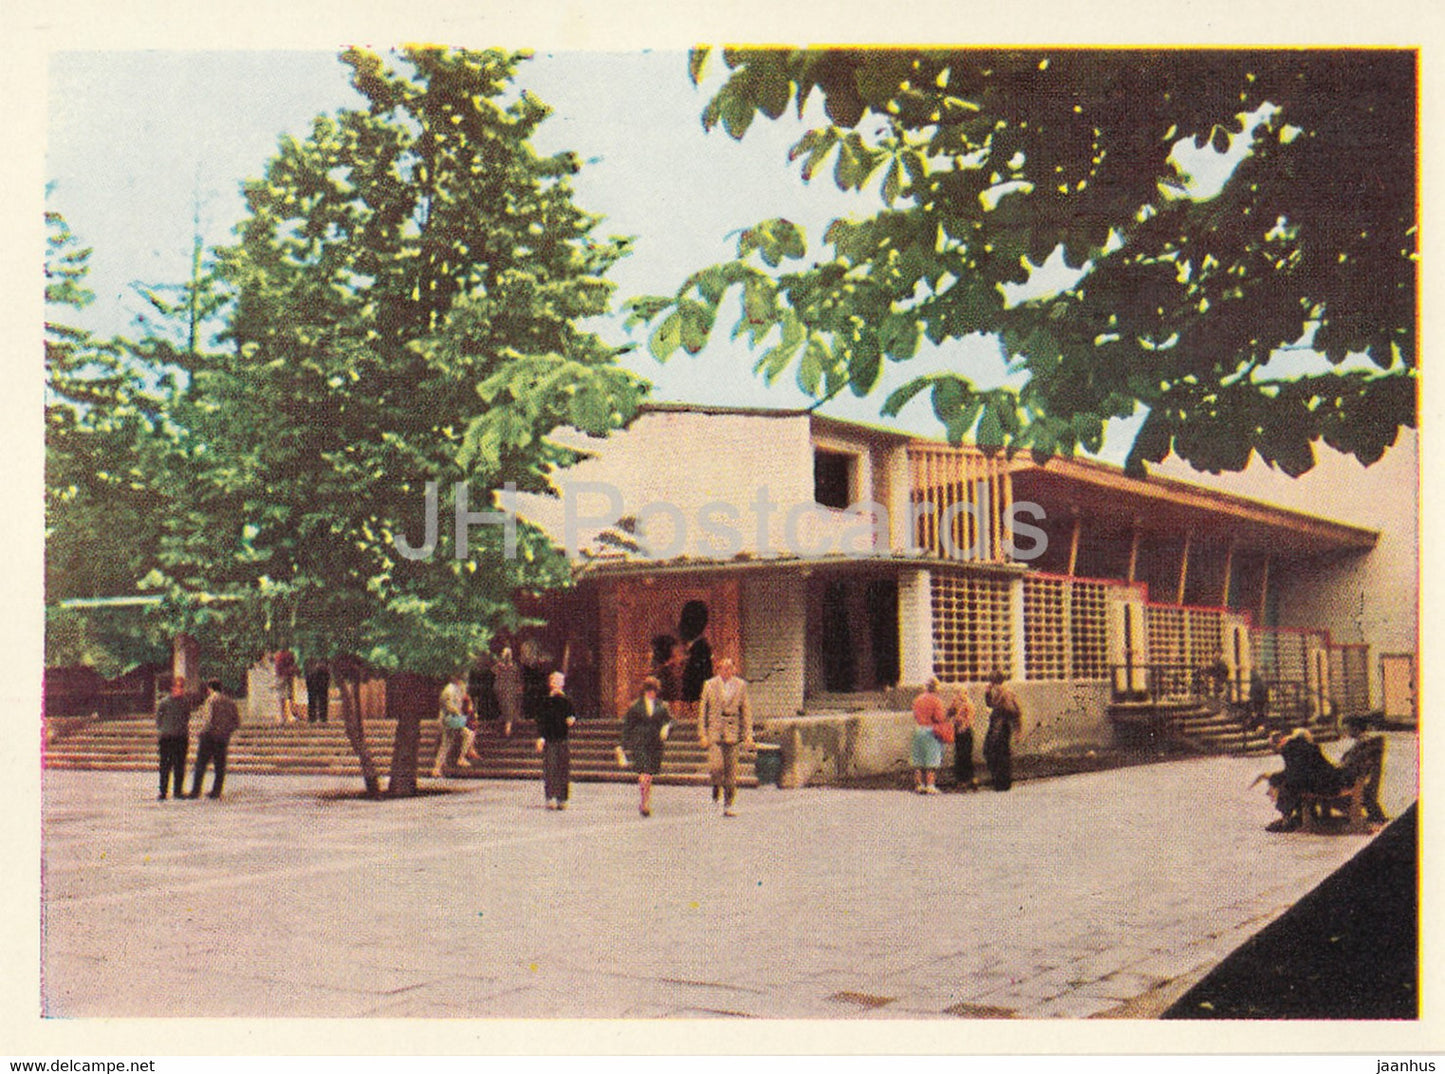 Palanga - A new large cinema awaits the visitors to the resort - 1 - Lithuania USSR - unused - JH Postcards